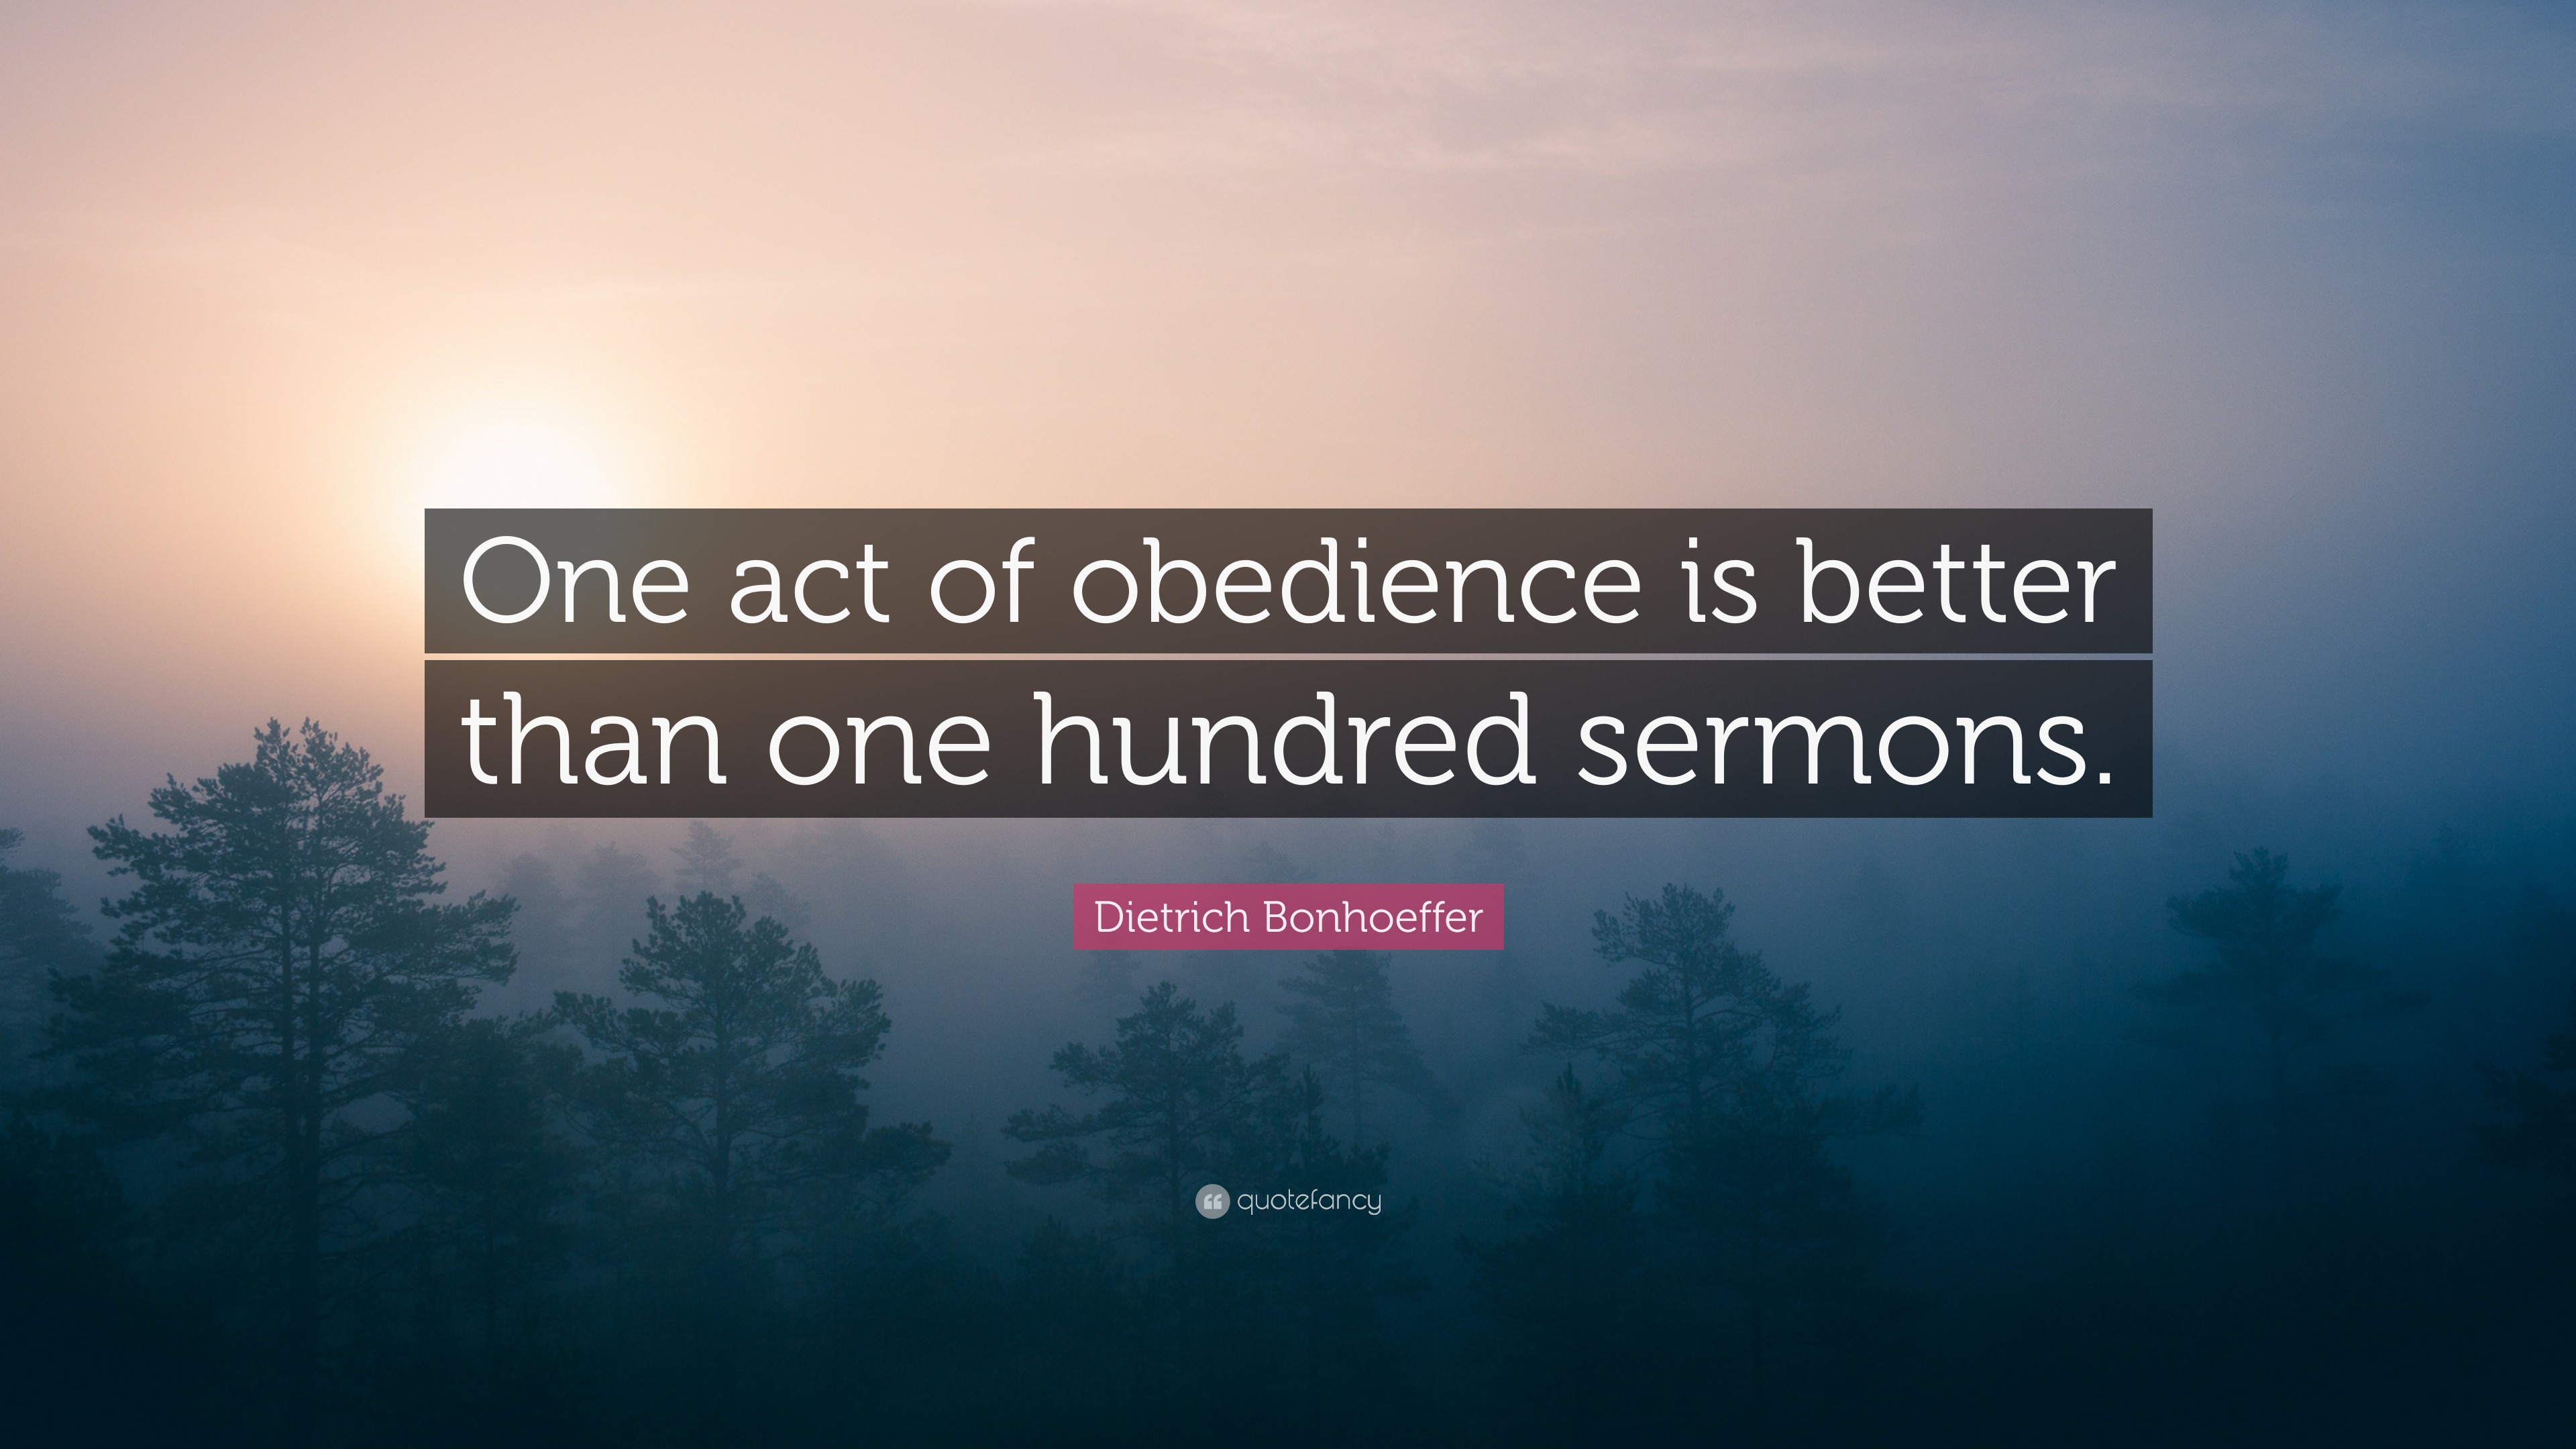 Dietrich Bonhoeffer Quote: “One act of obedience is better than one ...